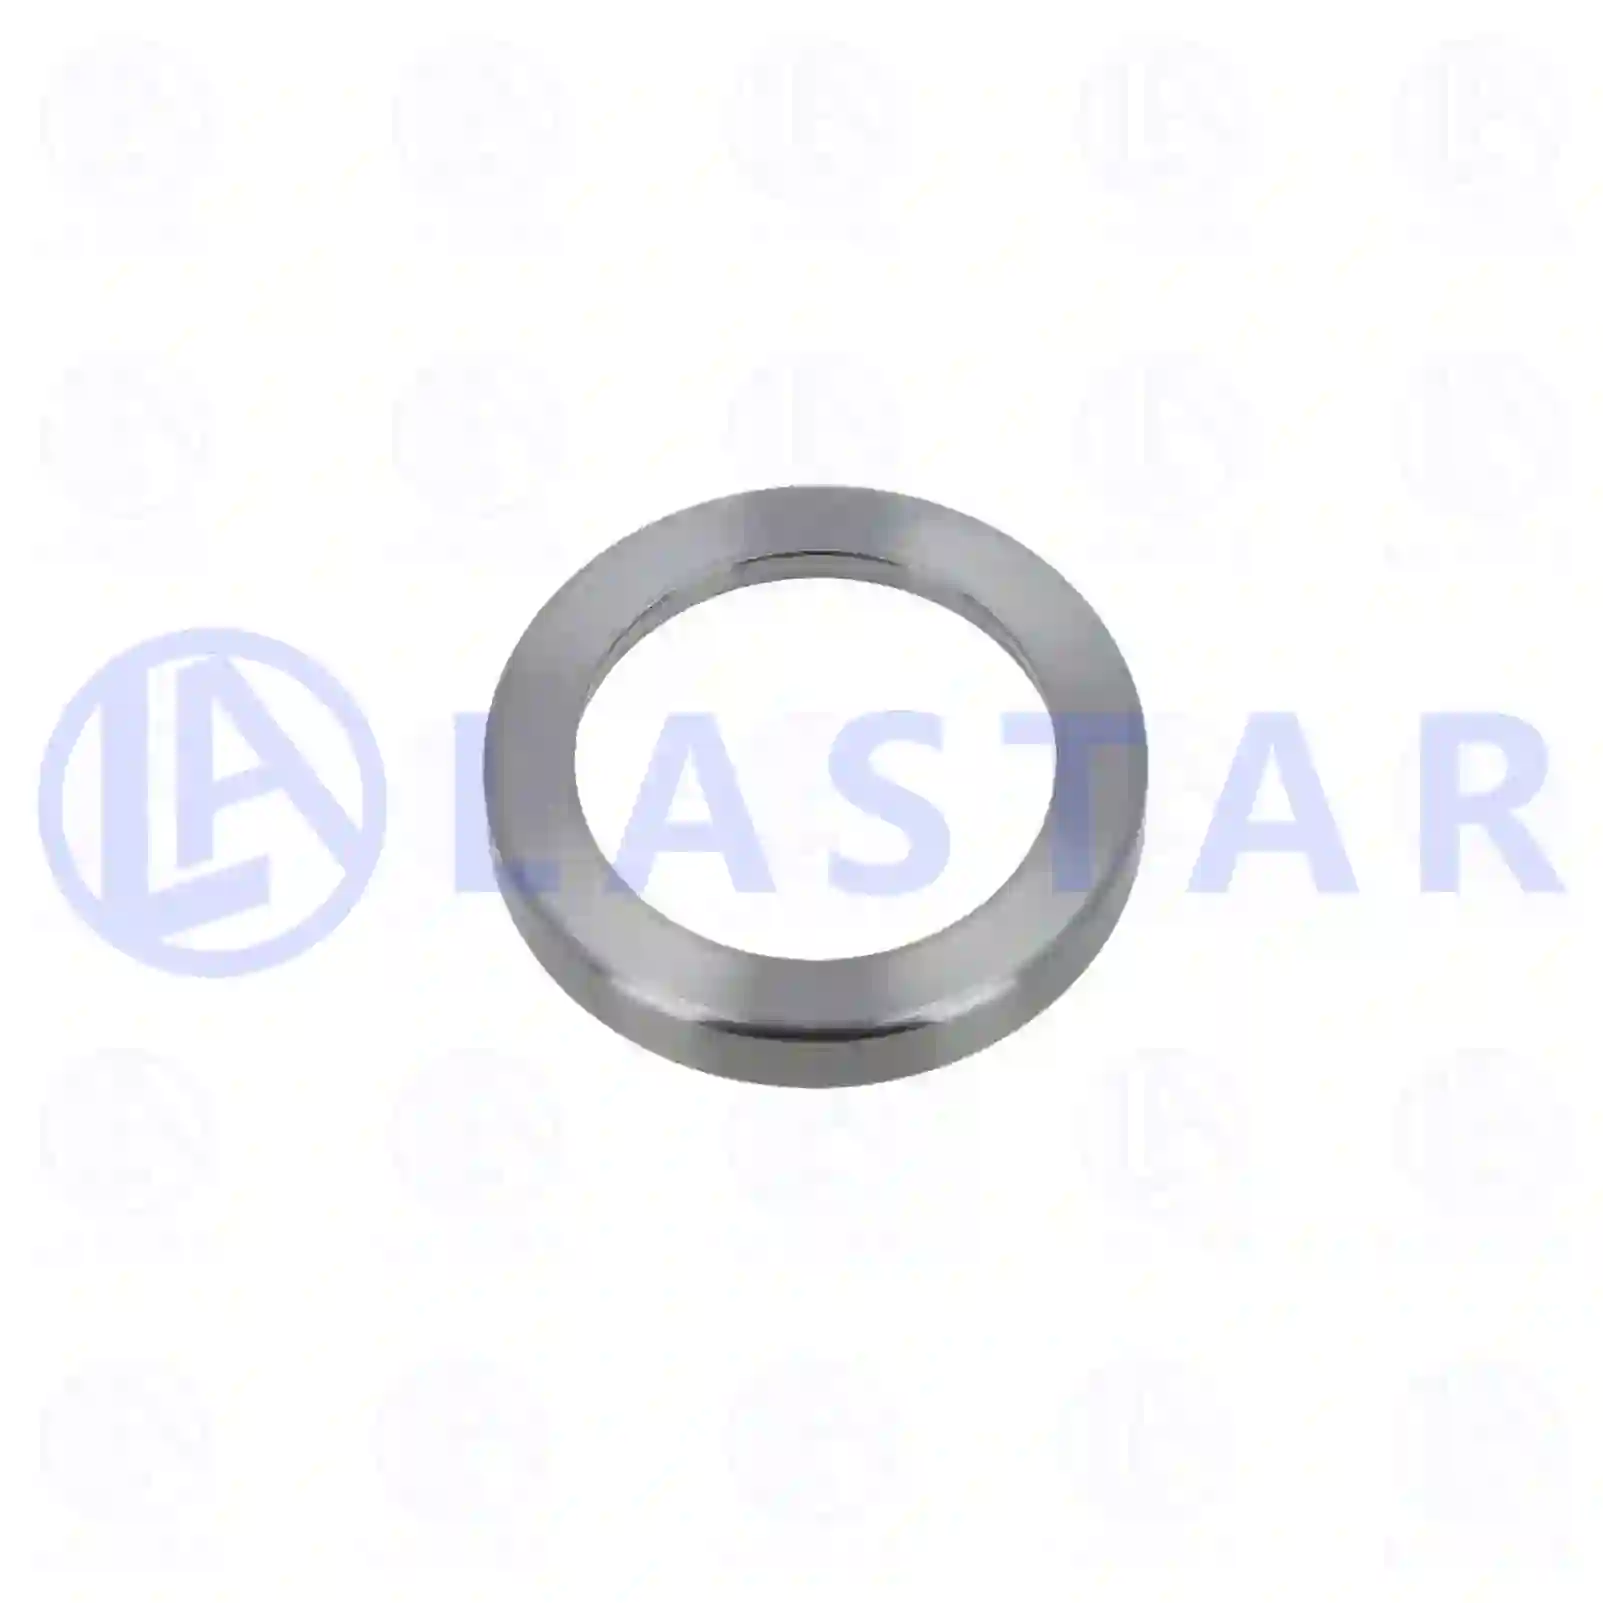  Valve seat ring, intake || Lastar Spare Part | Truck Spare Parts, Auotomotive Spare Parts